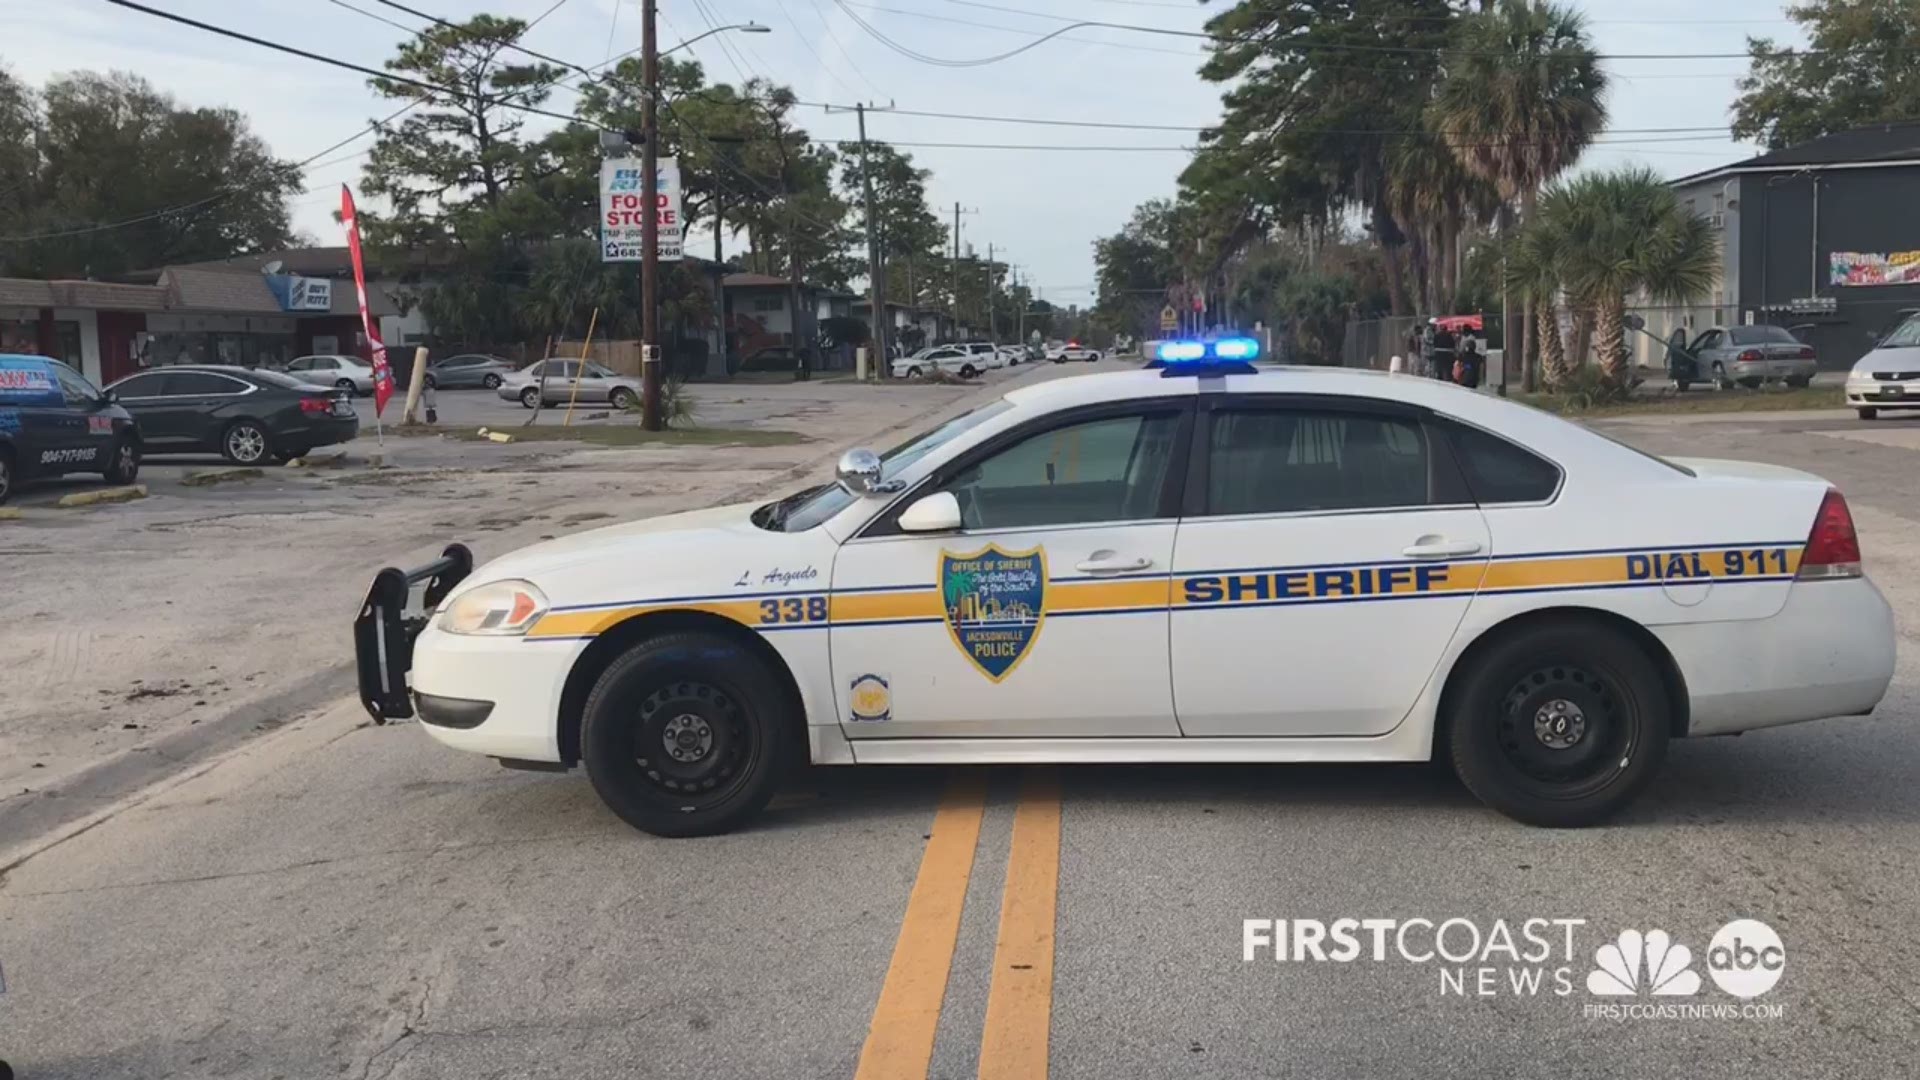 A man was shot in the leg during a drive-by shooting in Arlington, according to the Jacksonville sheriff's office.